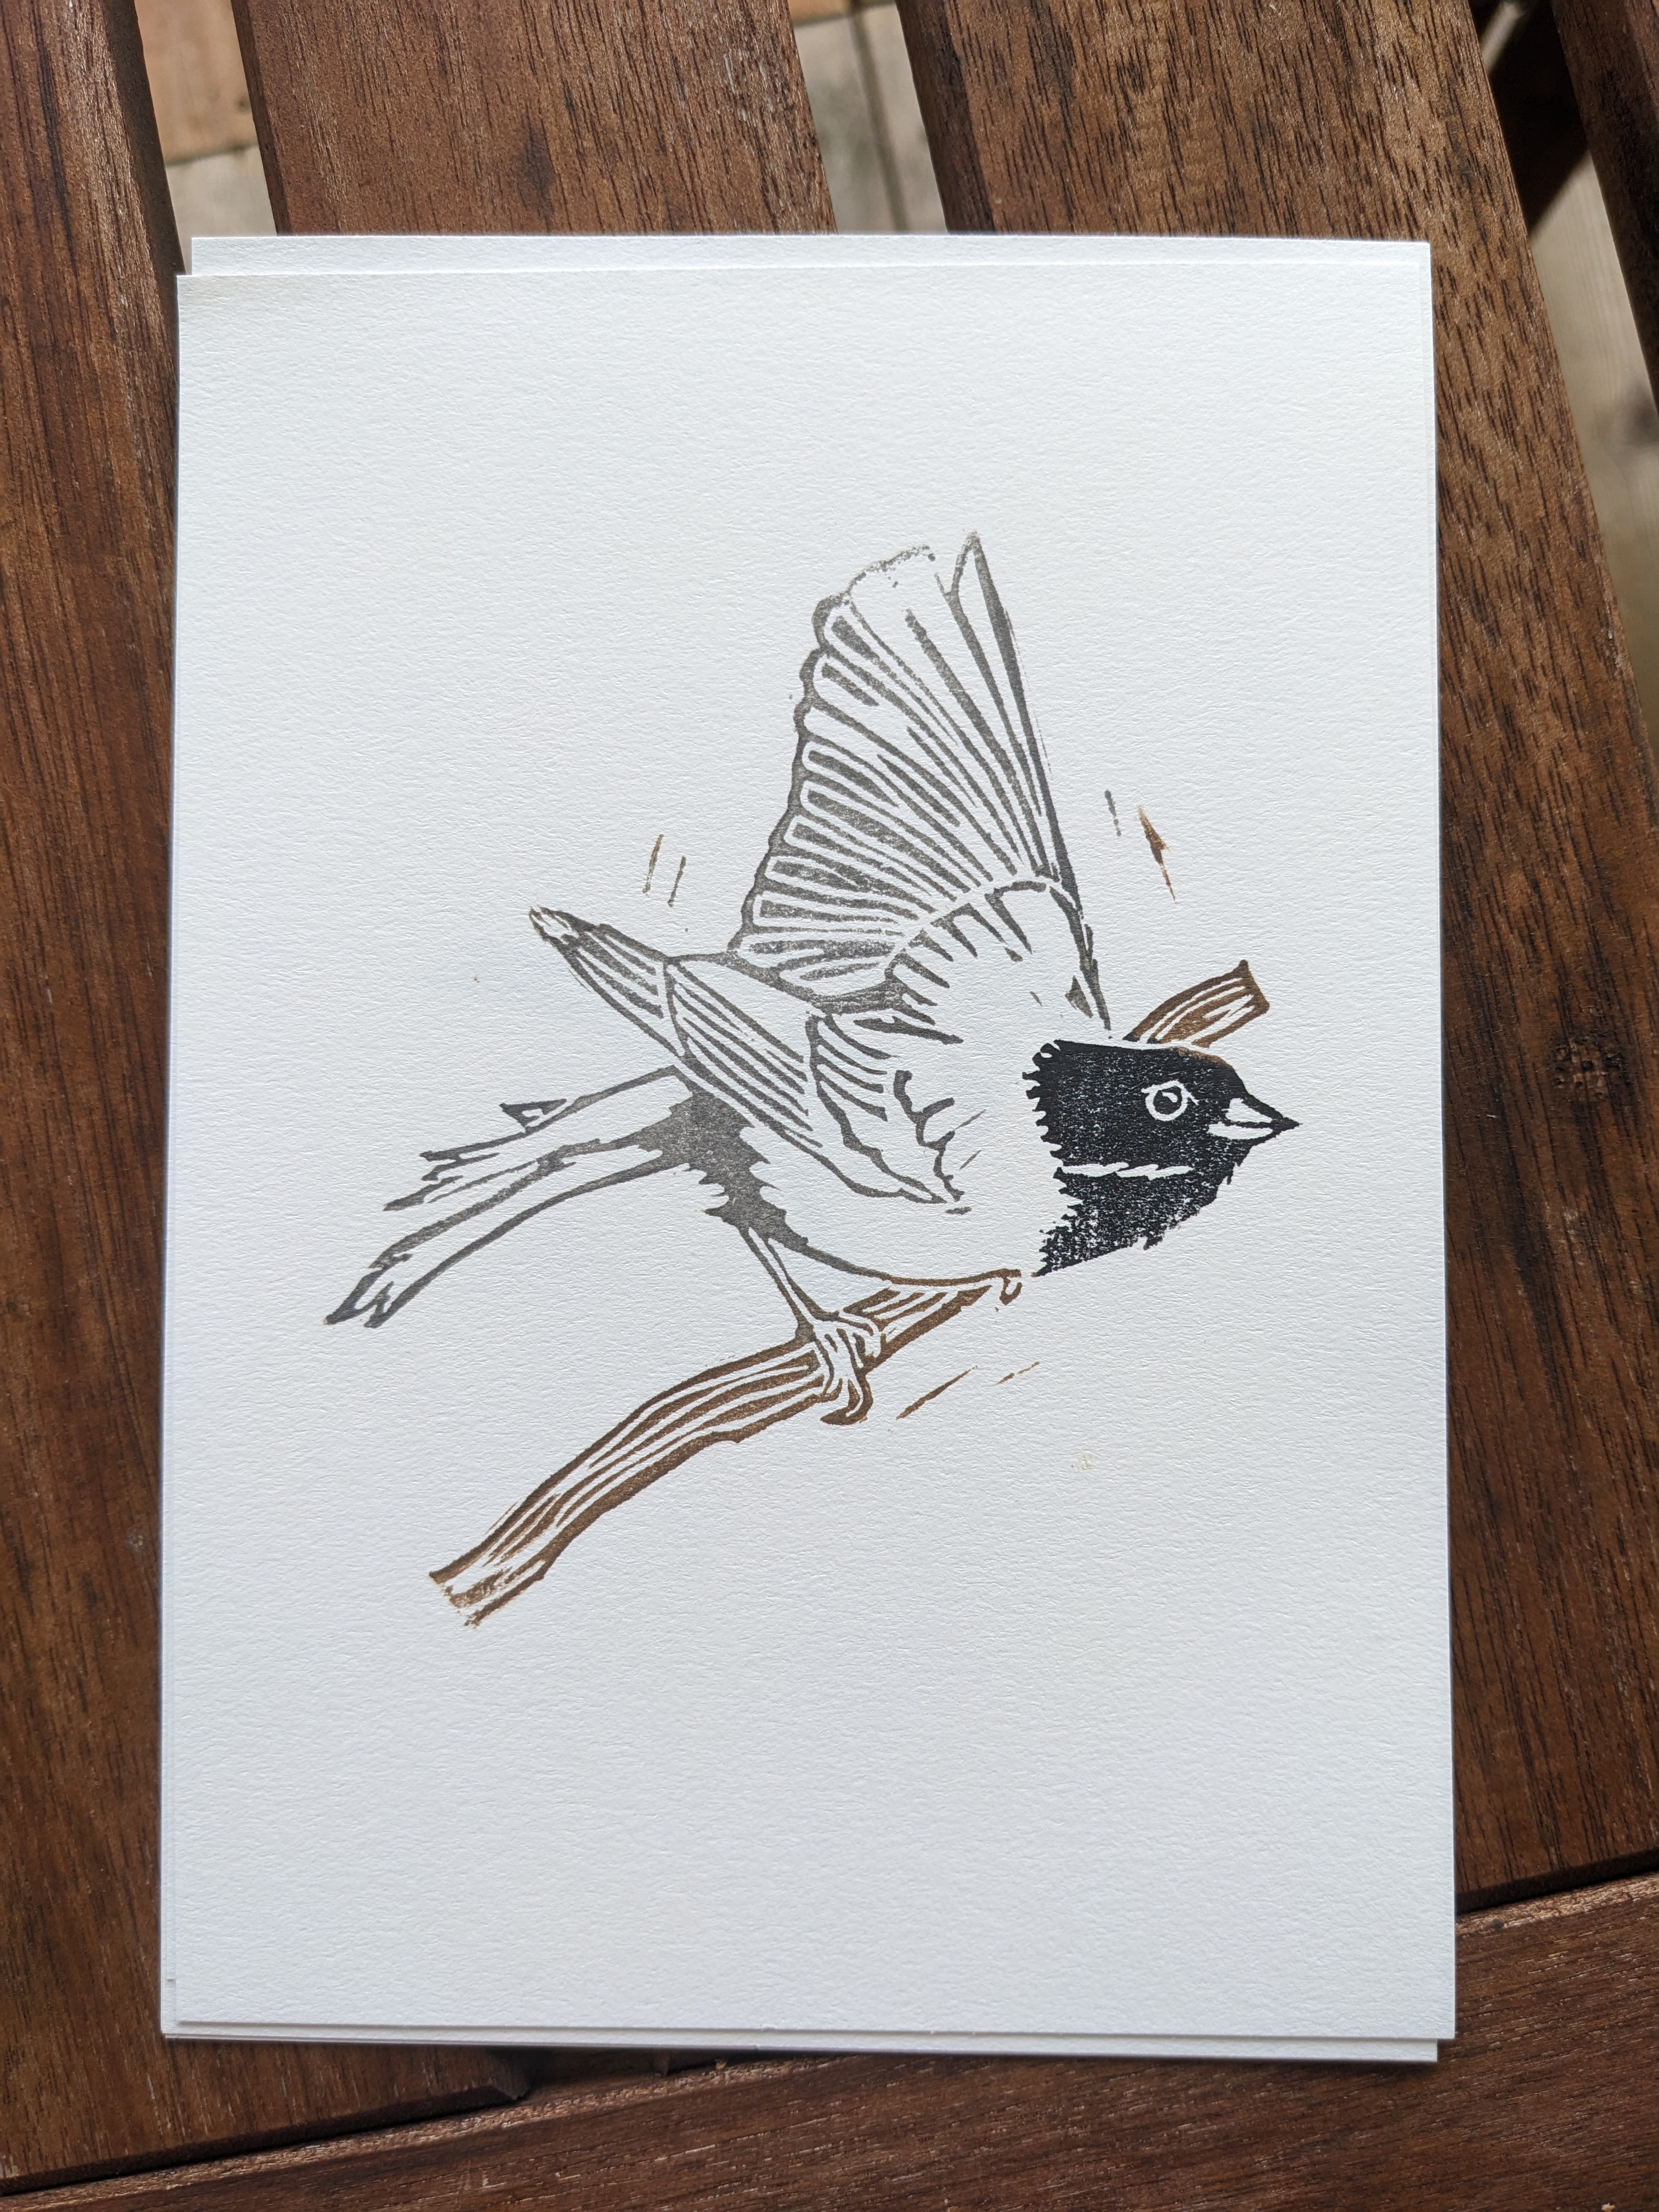 A print of a junco mid-takeoff from a branch. Eir head is inked in black, body in gray, and the branch in sepia.